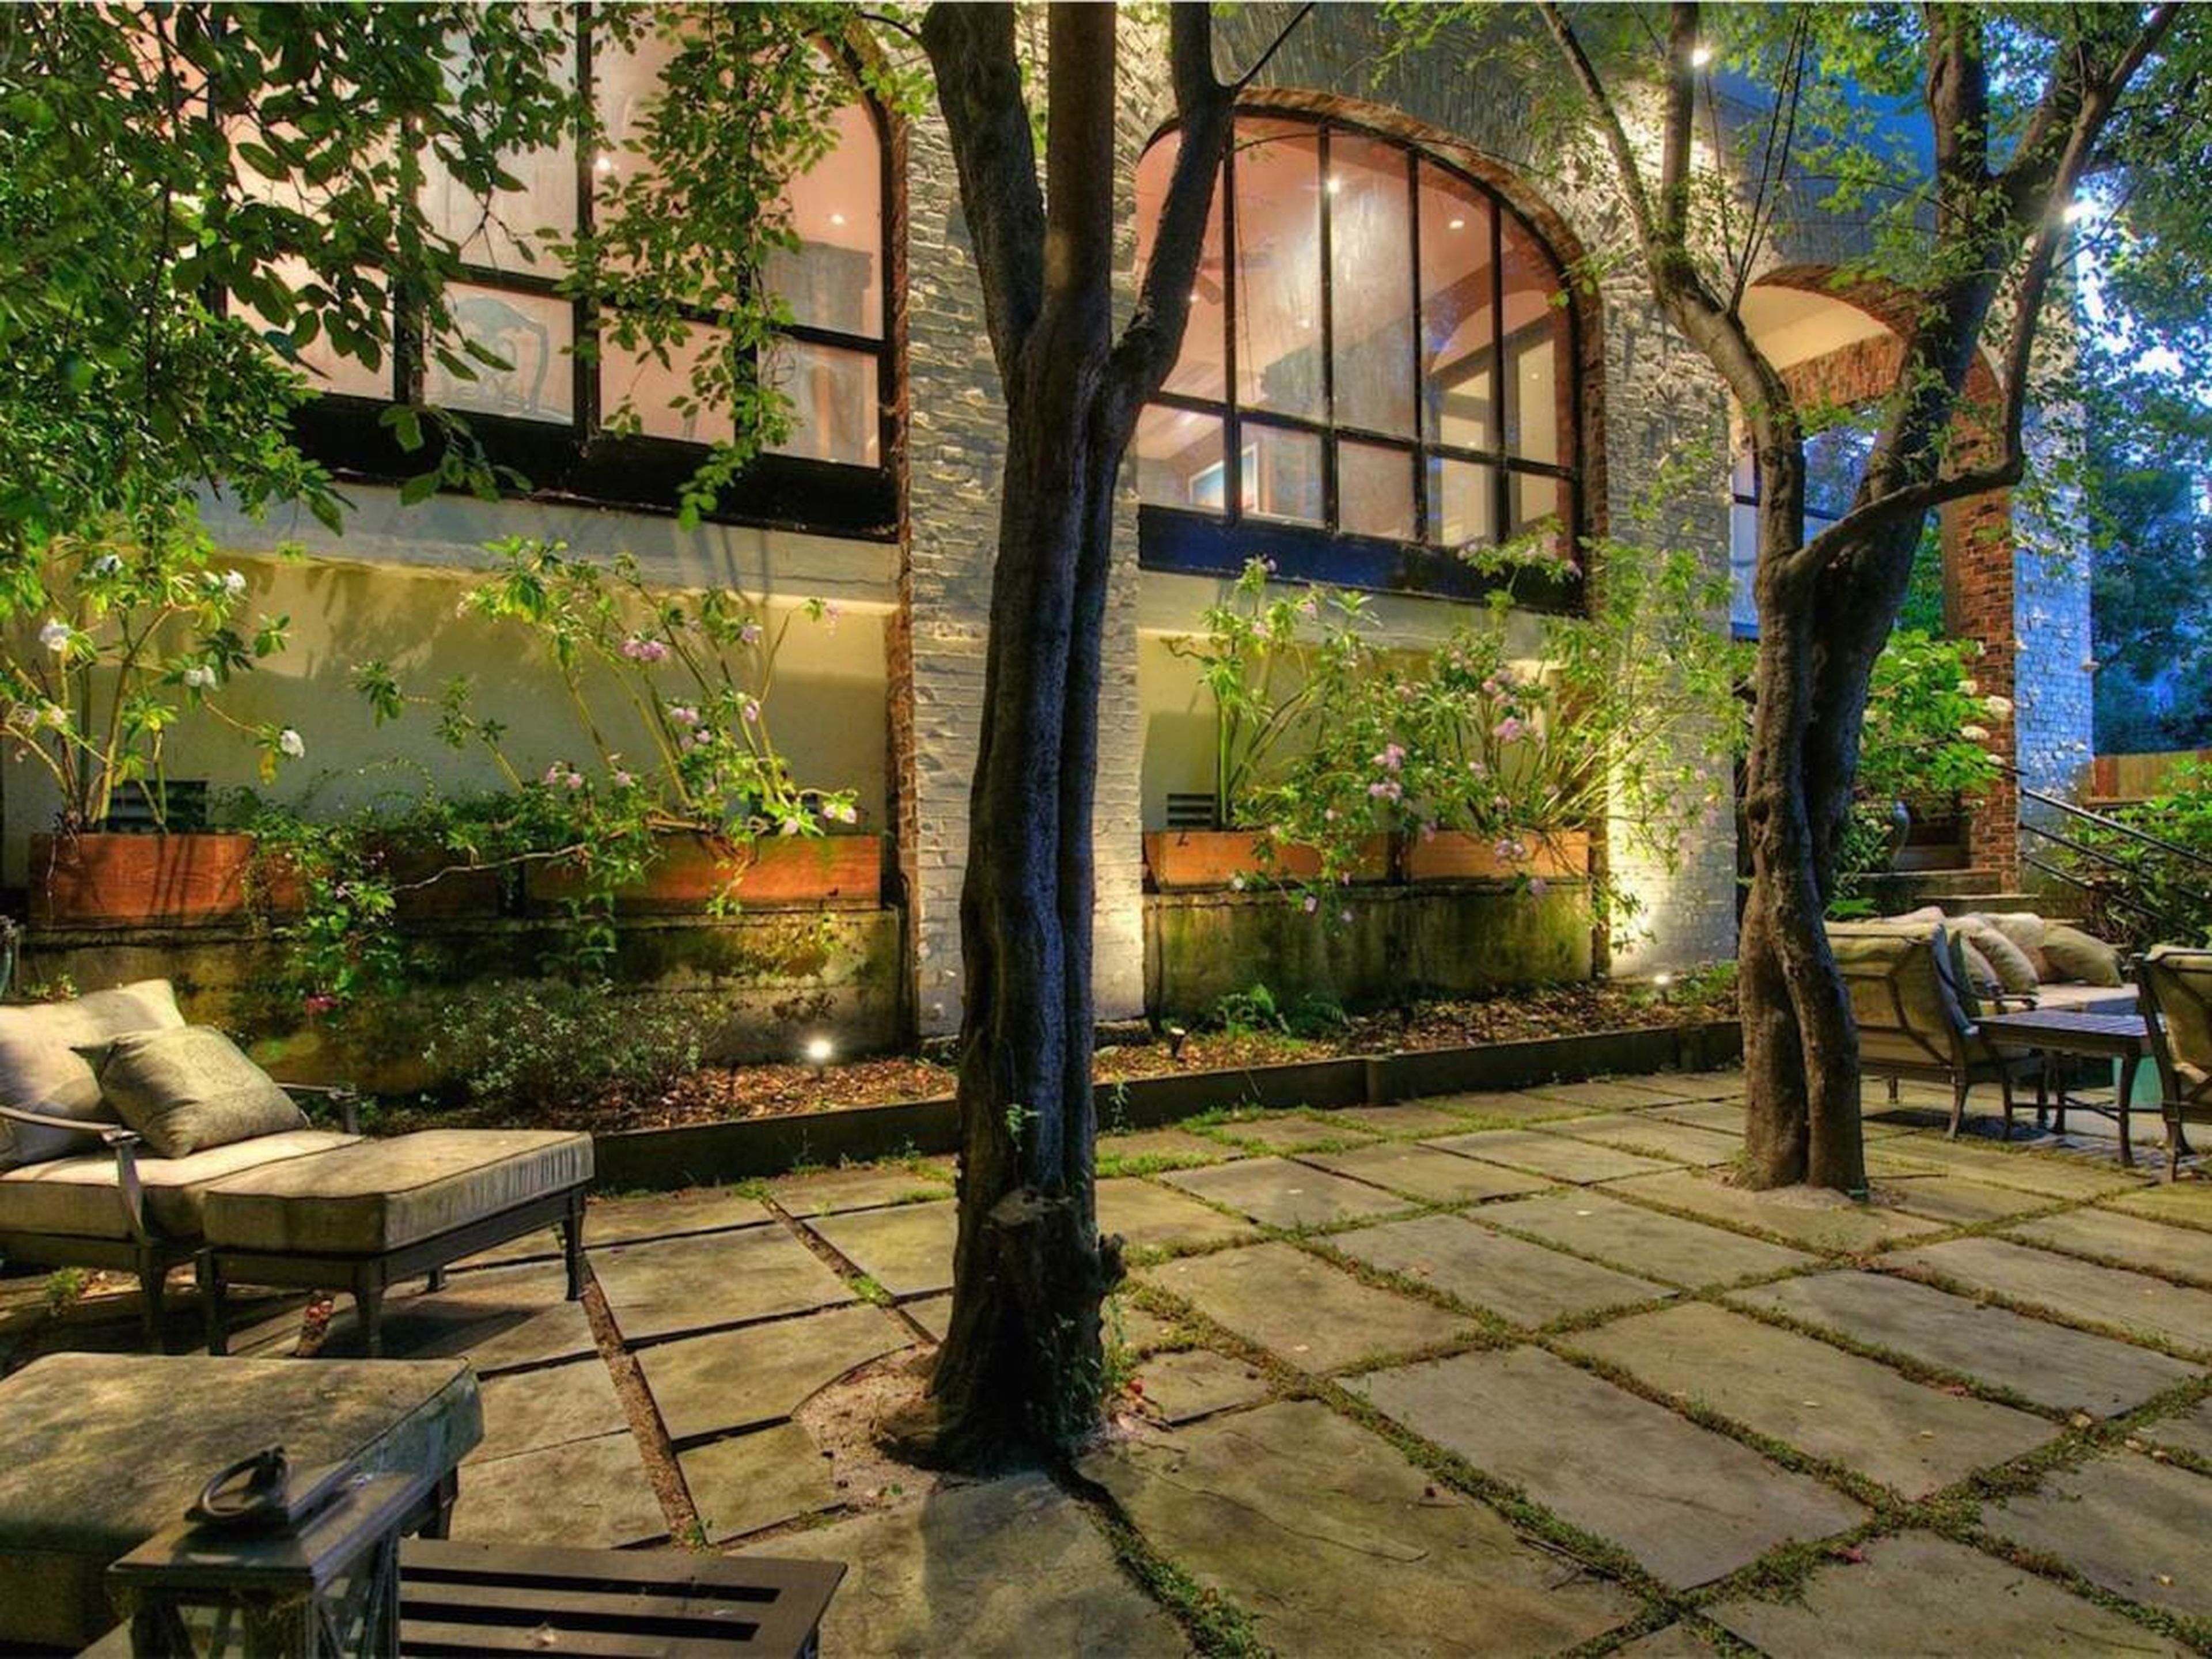 Residents can escape the hustle and bustle in their private courtyard.